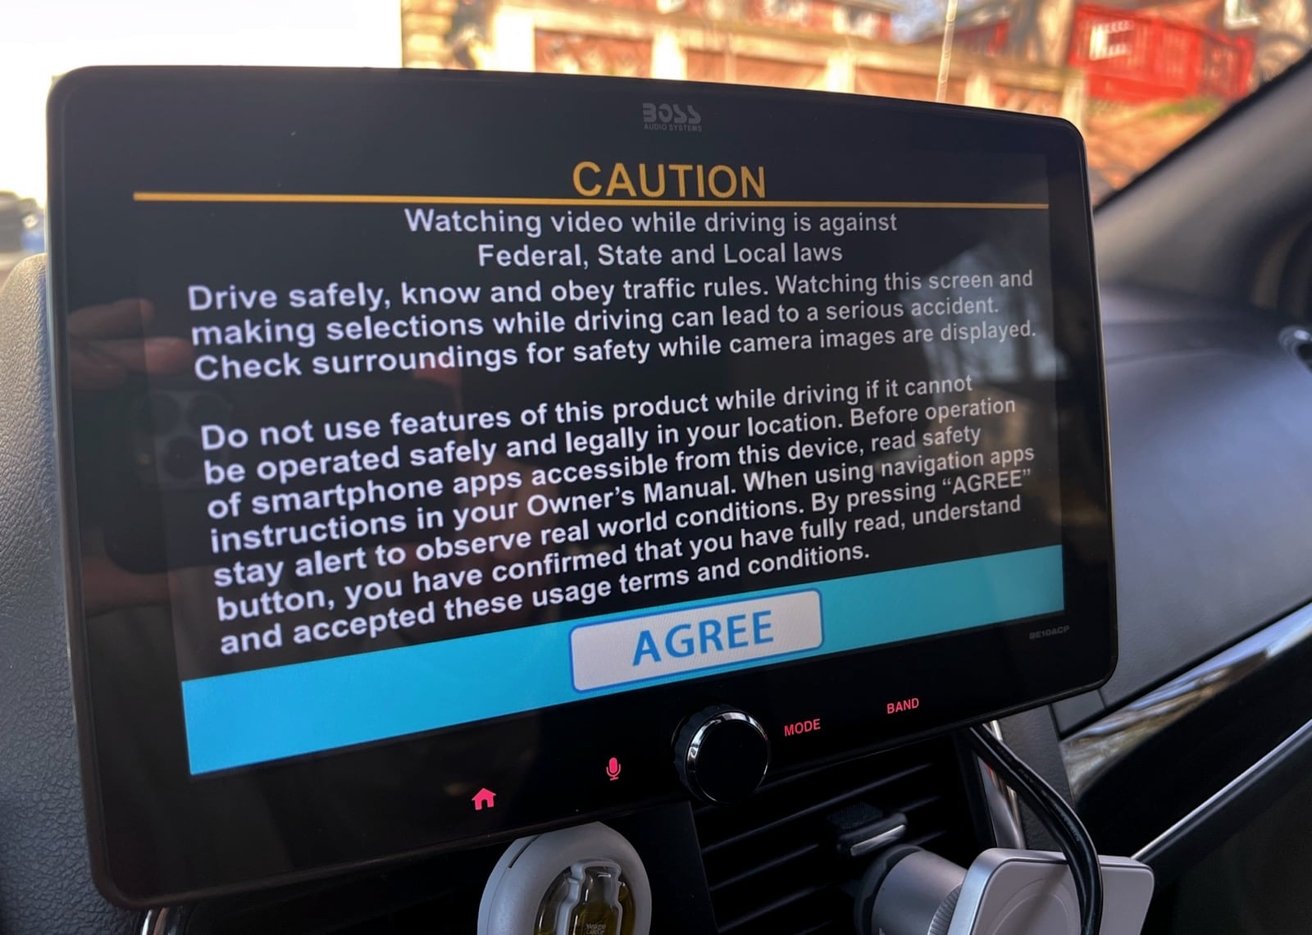 The display shows a large disclaimer, basically telling you not to watch video while driving. 